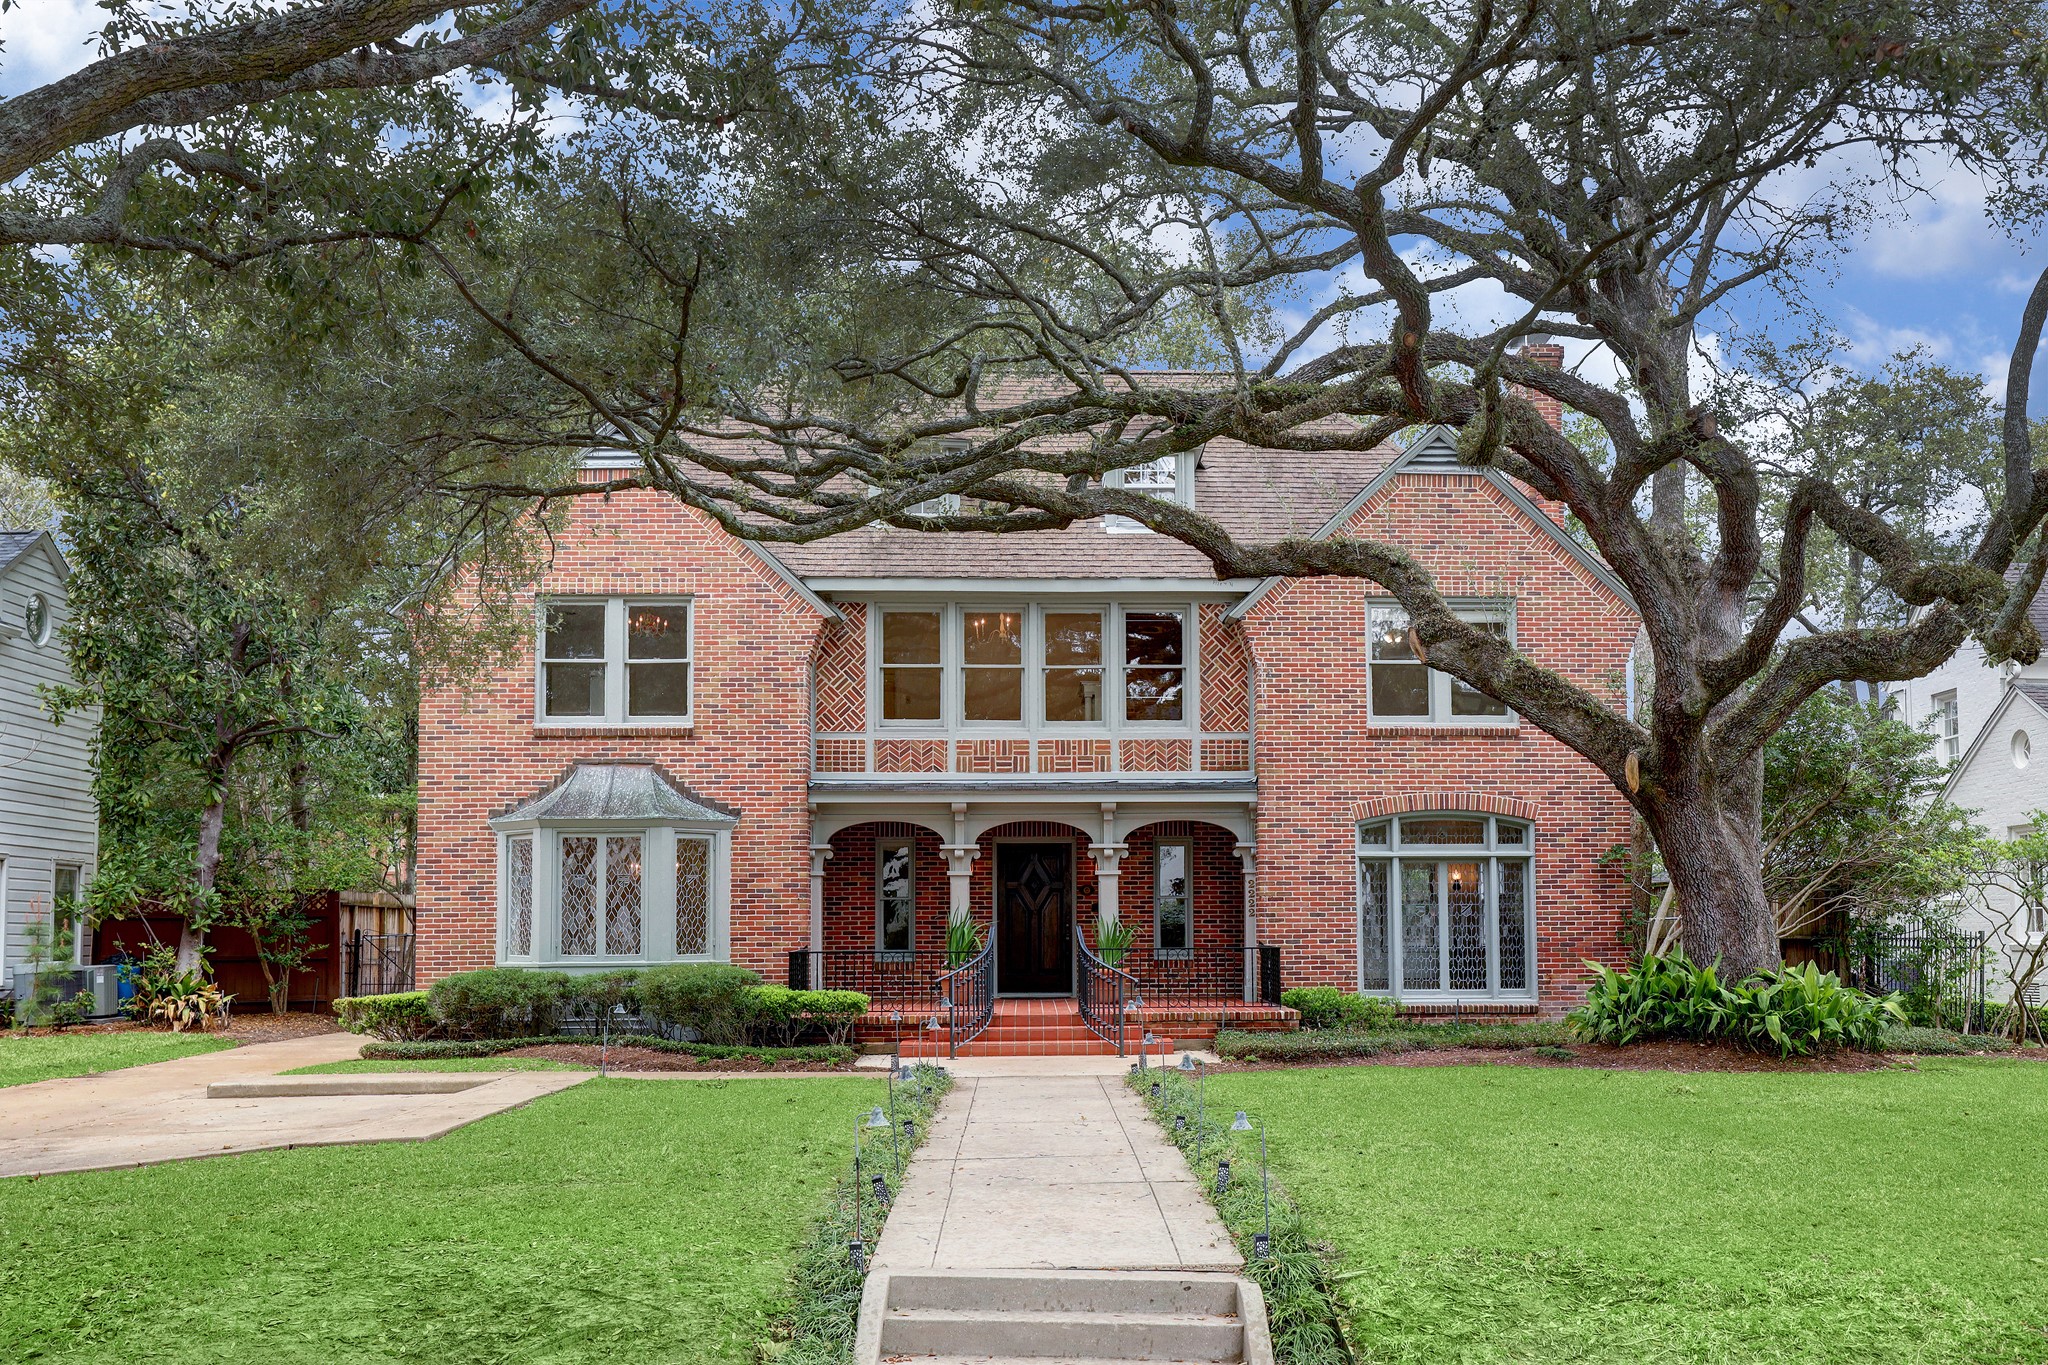 2222 Inwood is a Houston Landmark property in the Revival Tudor Style with a stately presence in one of the oldest sections of River Oaks. The beautiful 11,250 ft. lot has majestic live oak trees that frame this classic home. Spacious formal rooms, a 2011 gourmet kitchen addition with atrium ceilings, sunroom and the 3rd floor flexible space make this home very livable!